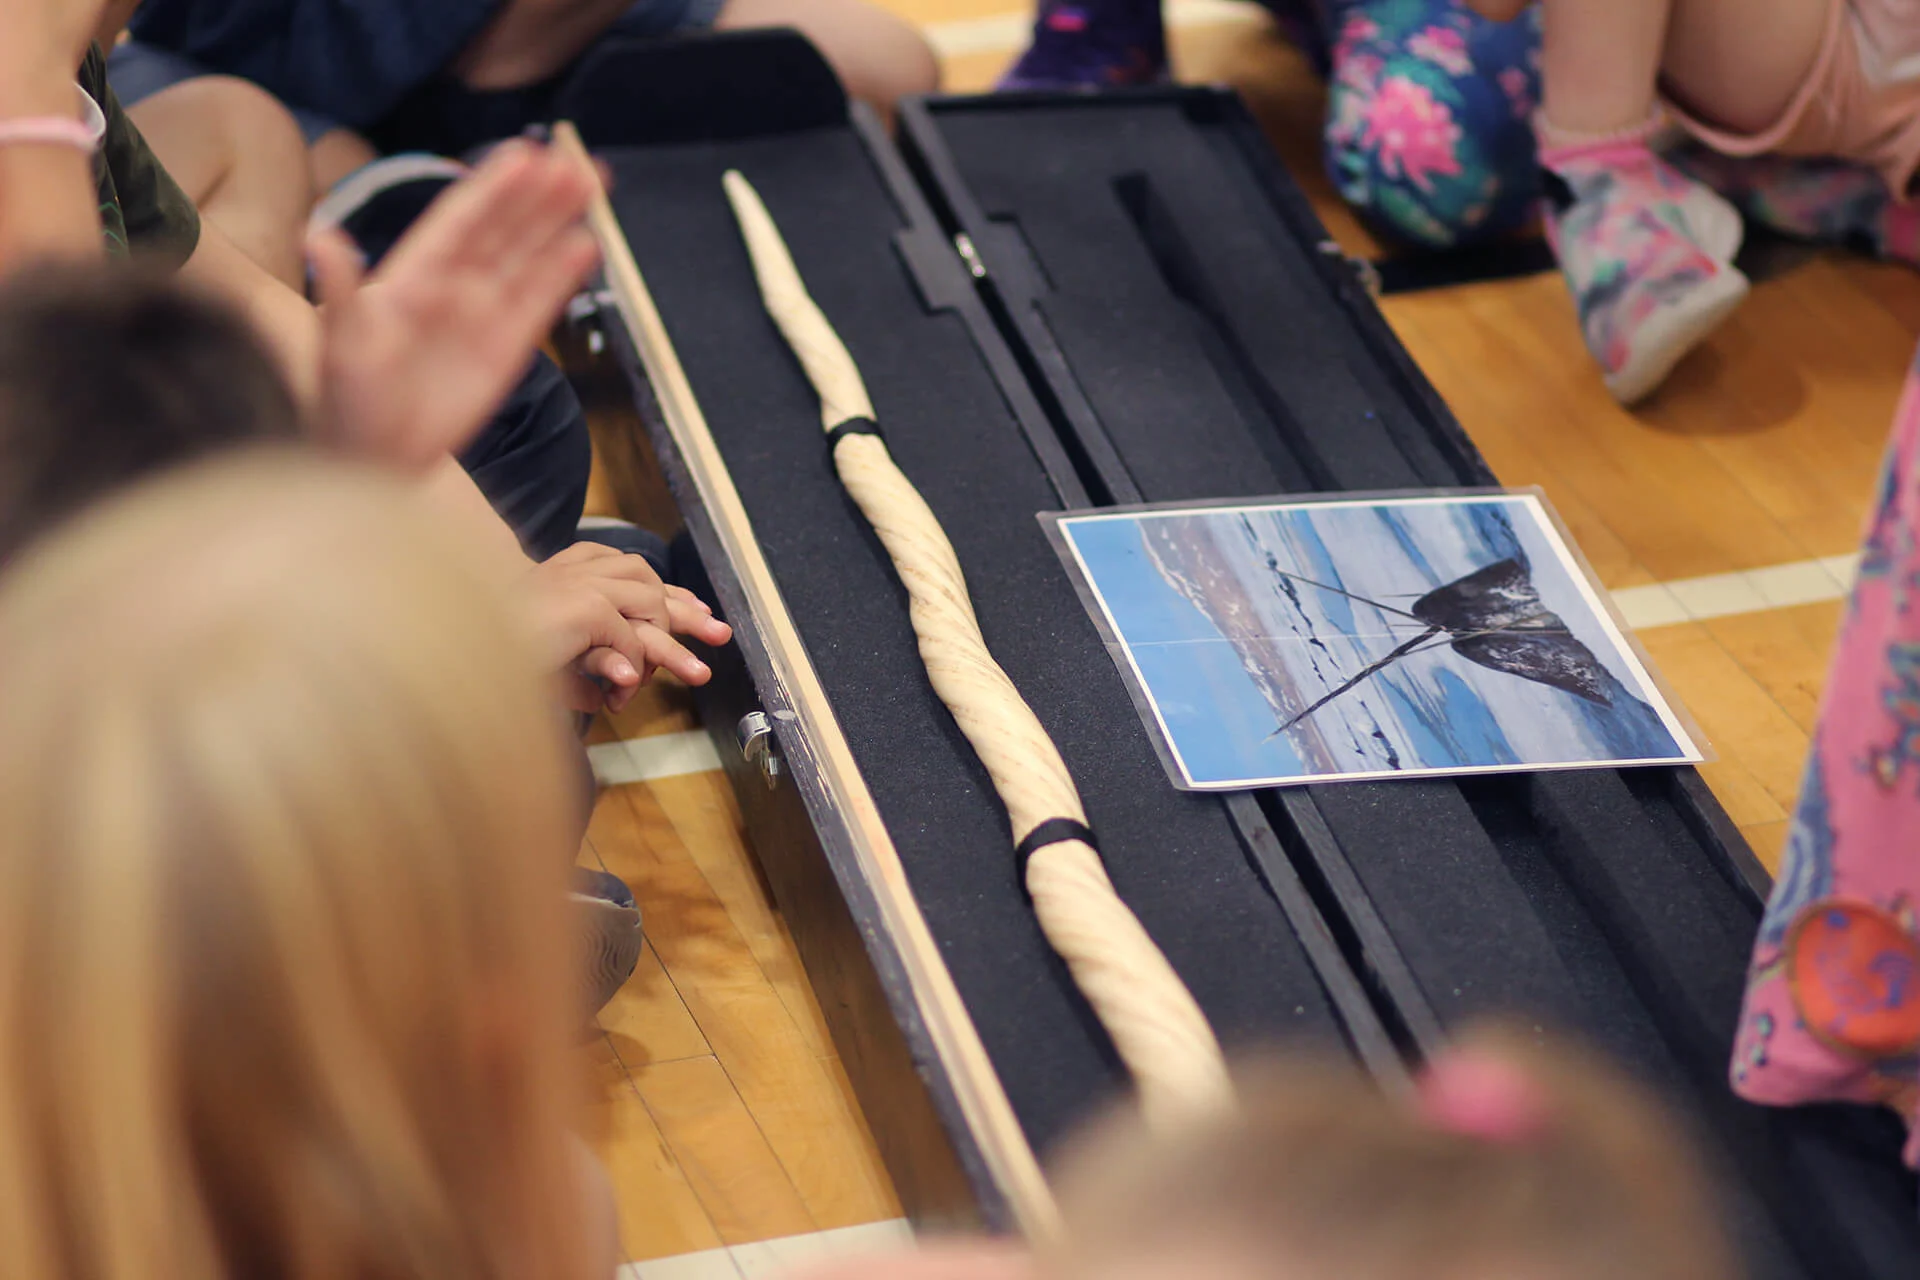 Ever seen narwhal tusk? It's one of the more magical moments the kids get to experience. (Rachel Maclean)